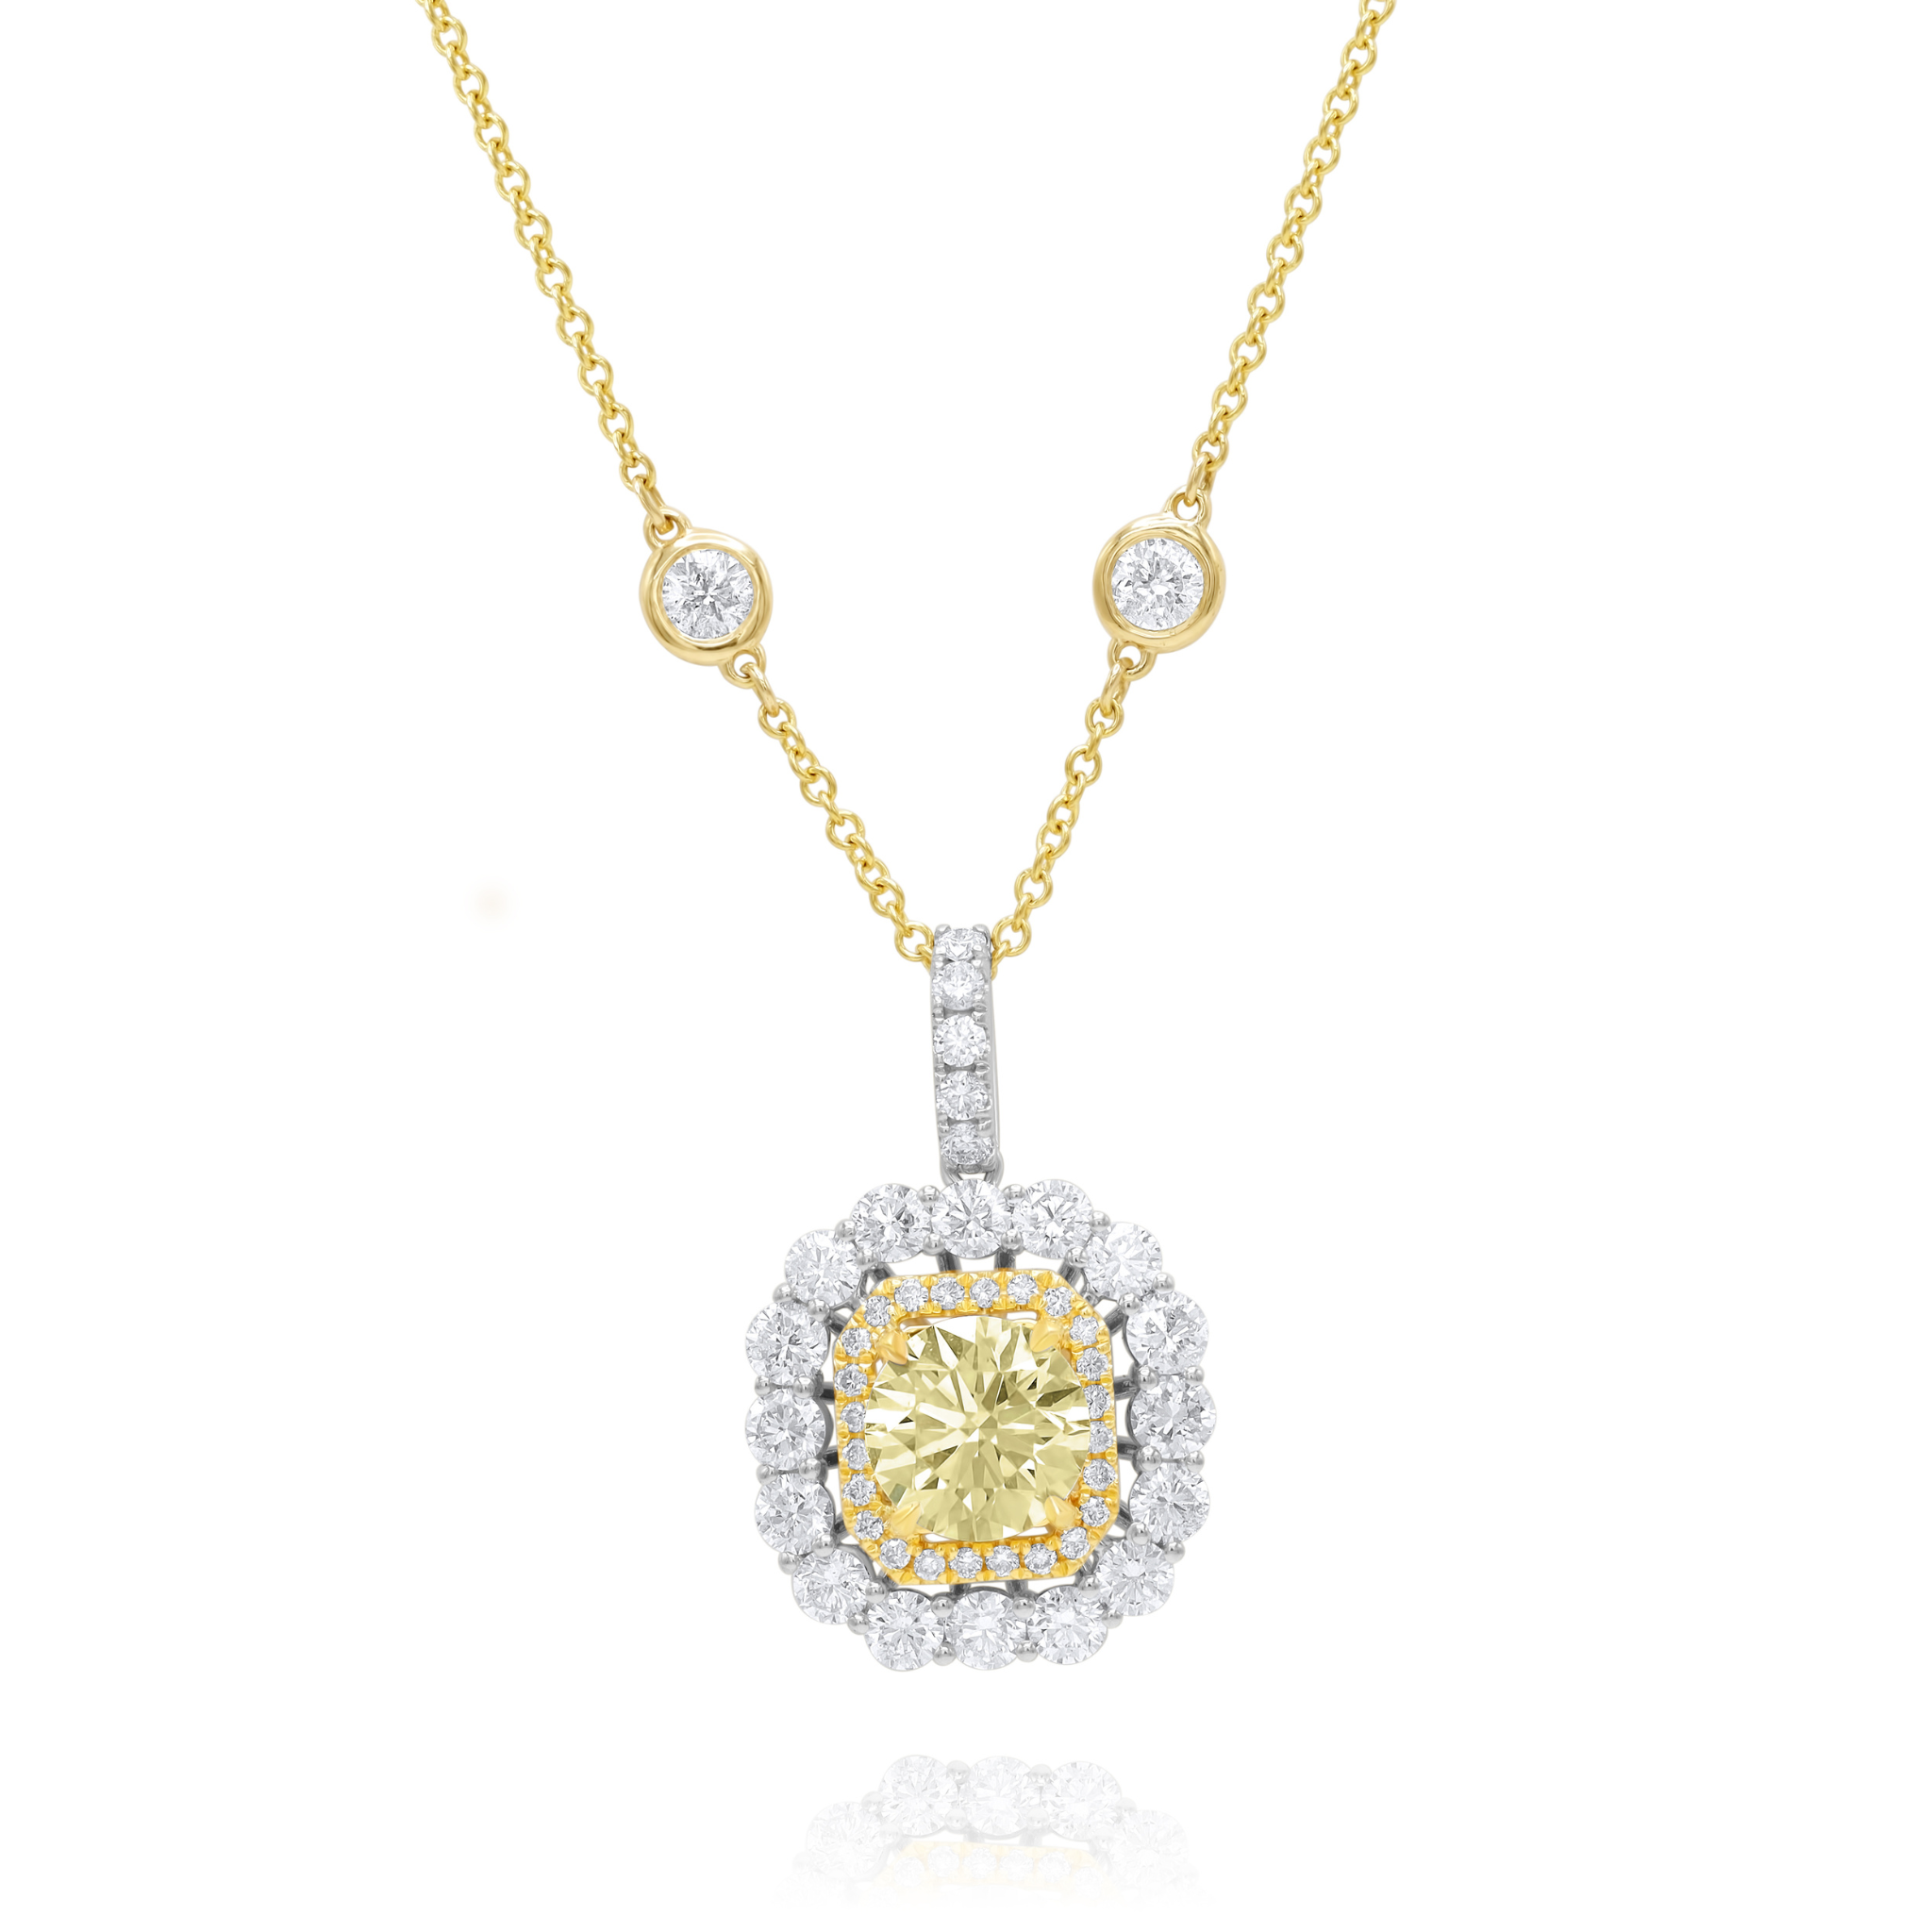 3.96ct Fancy Yellow Oval Diamond By the Yard Necklace.jpg